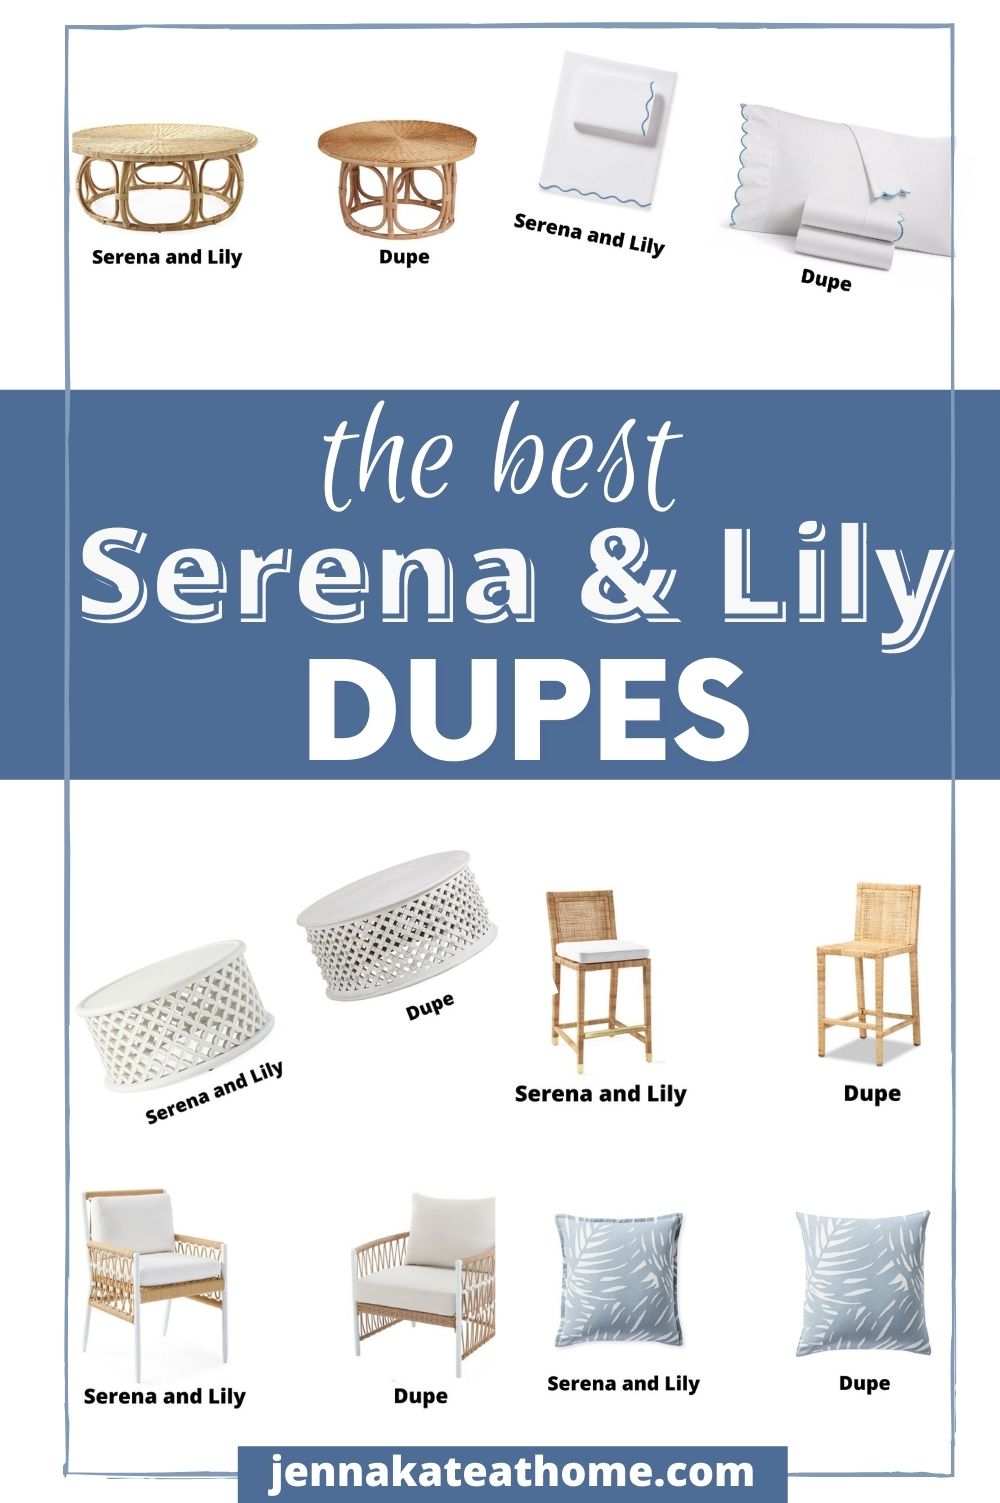 The Best Serena & Lily Dupes